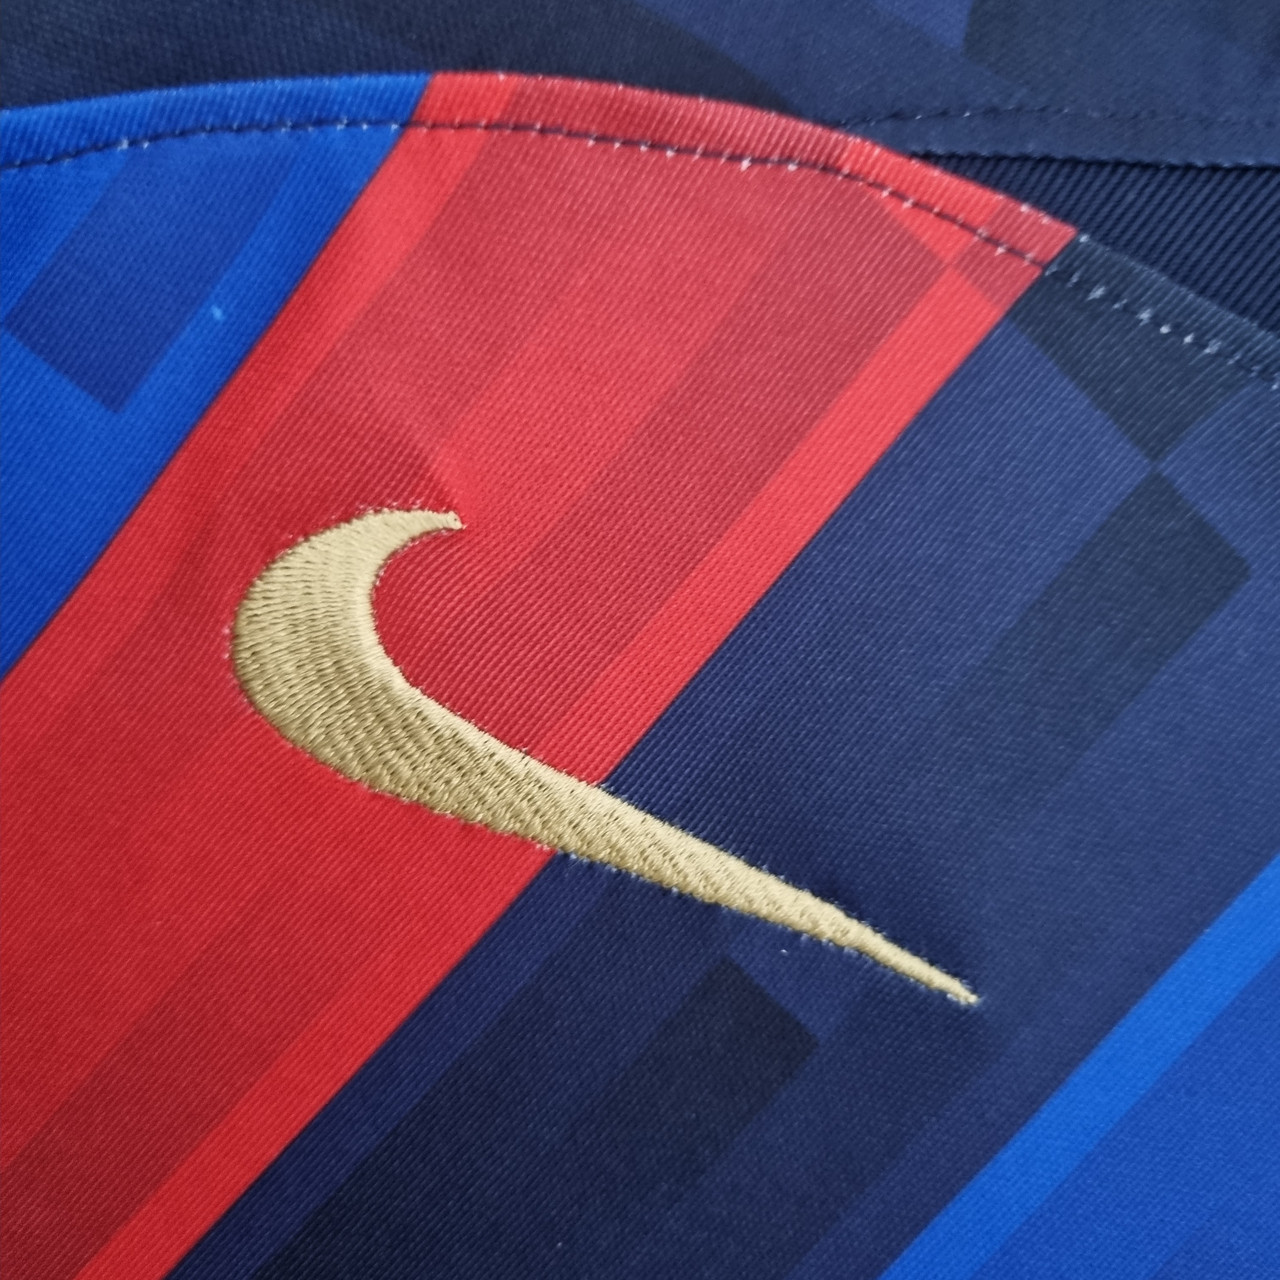 NIKE FC BARCELONA 22/23 HOME JERSEY (BLUE/RED)